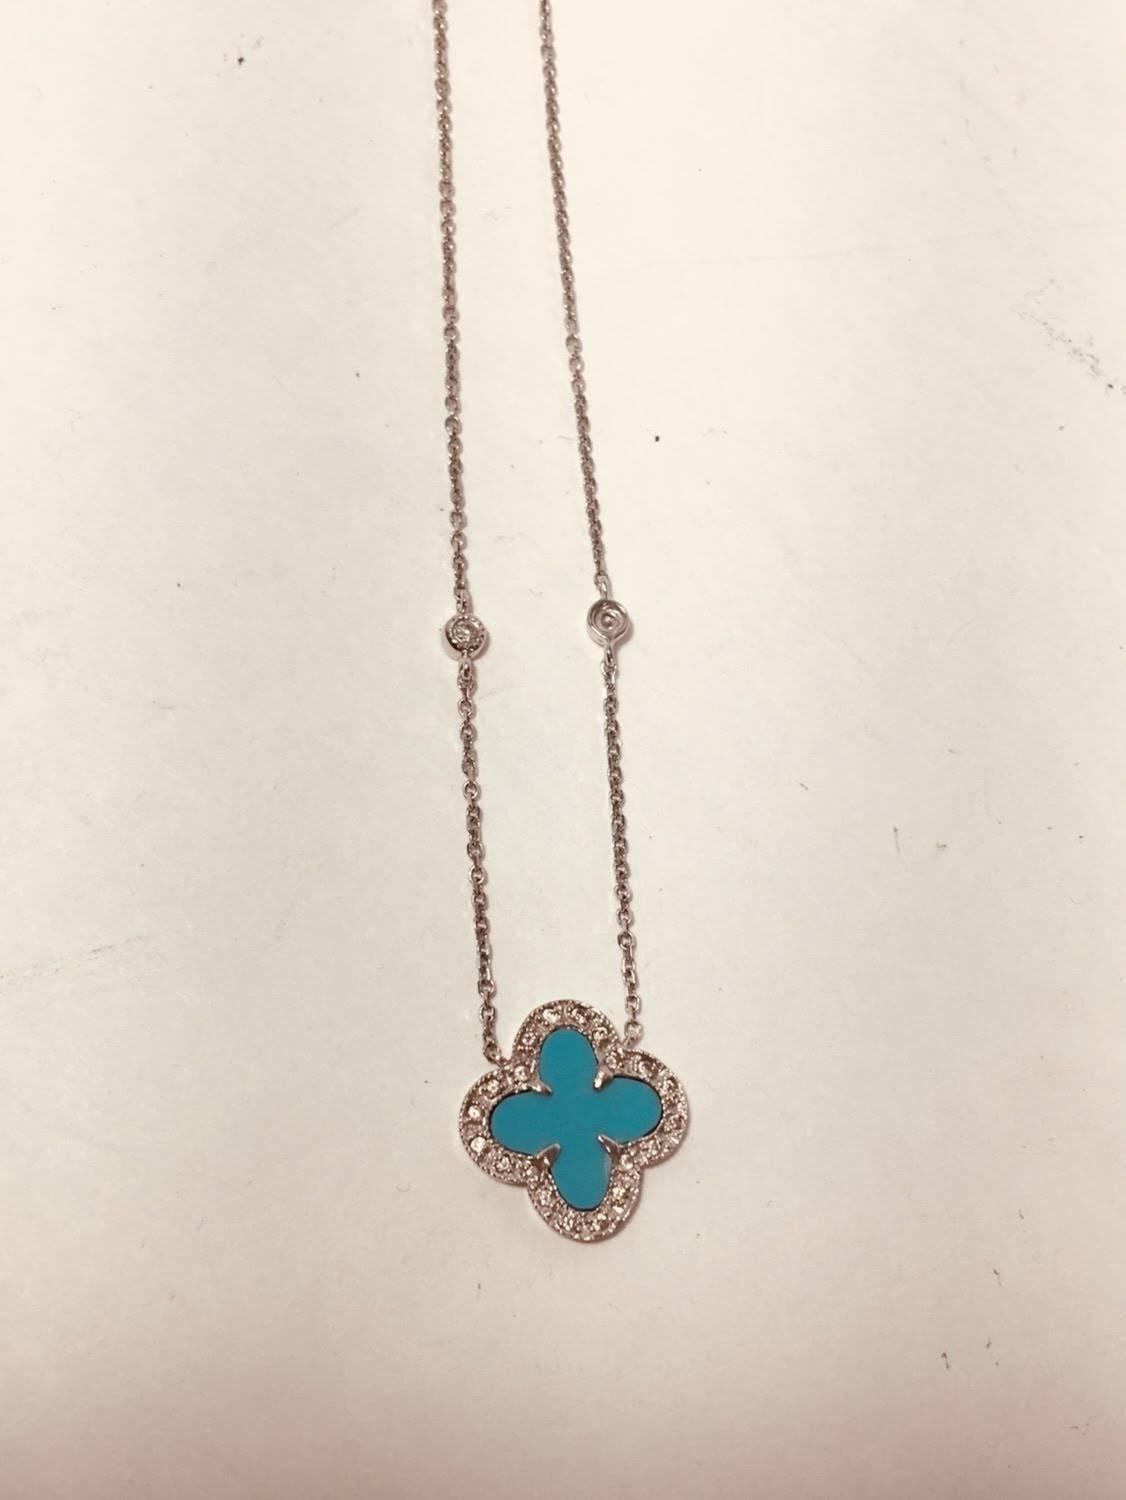 18K White Gold Turquoise Clover Necklace with Pave Diamonds